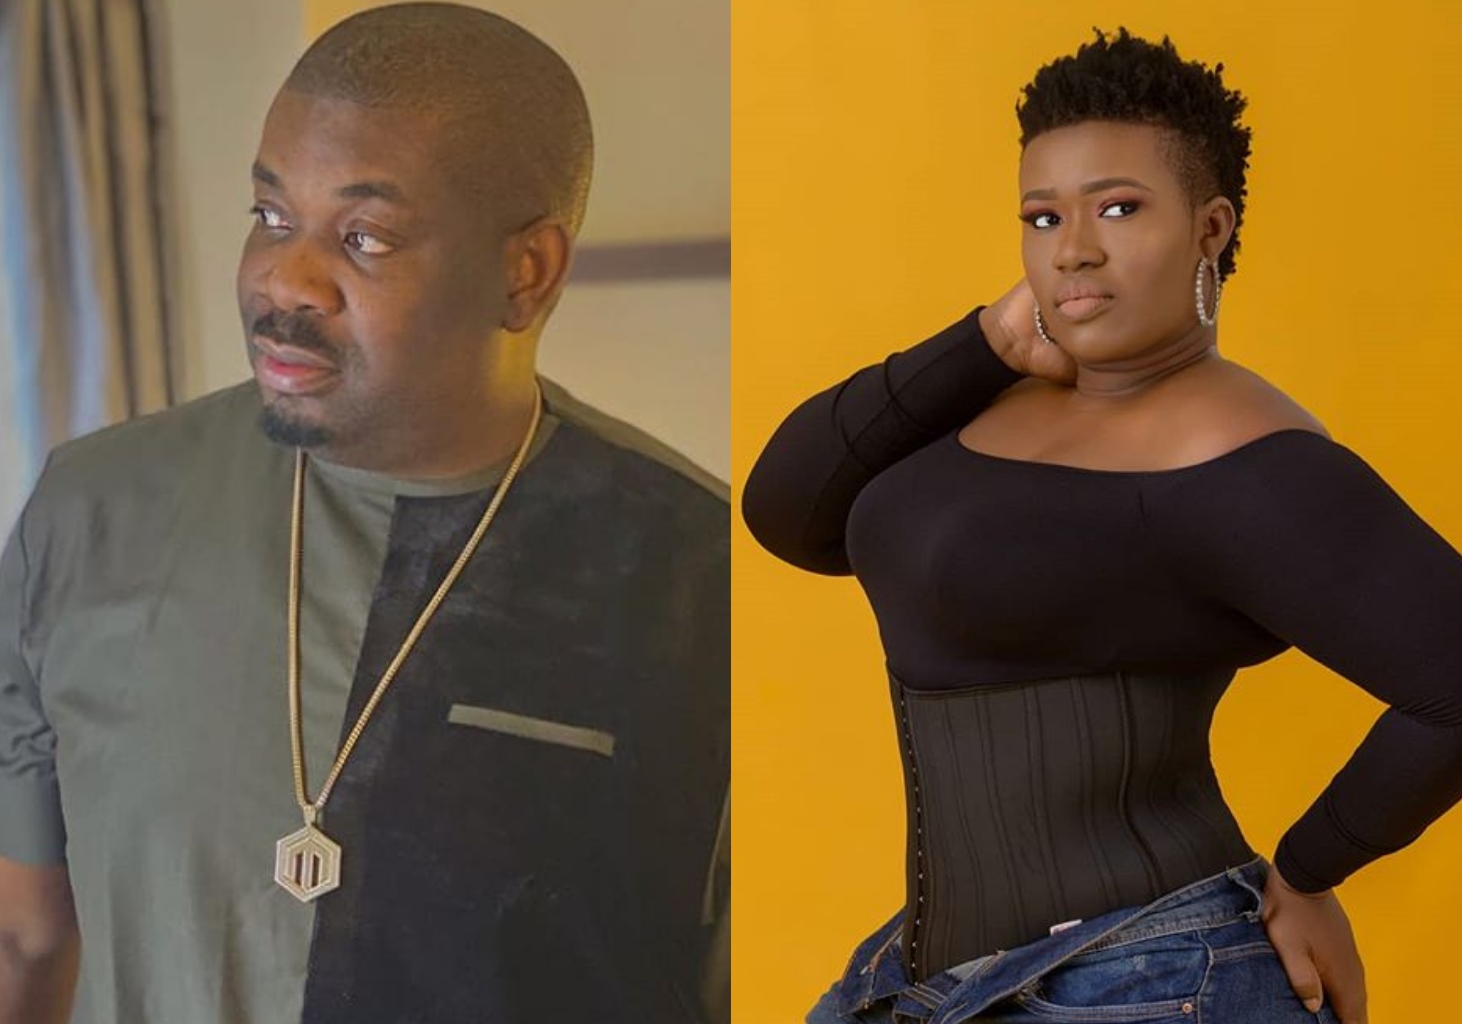 "What are you waiting for" – Comedian Warri Pikin mocks Don Jazzy relationship status (Video)